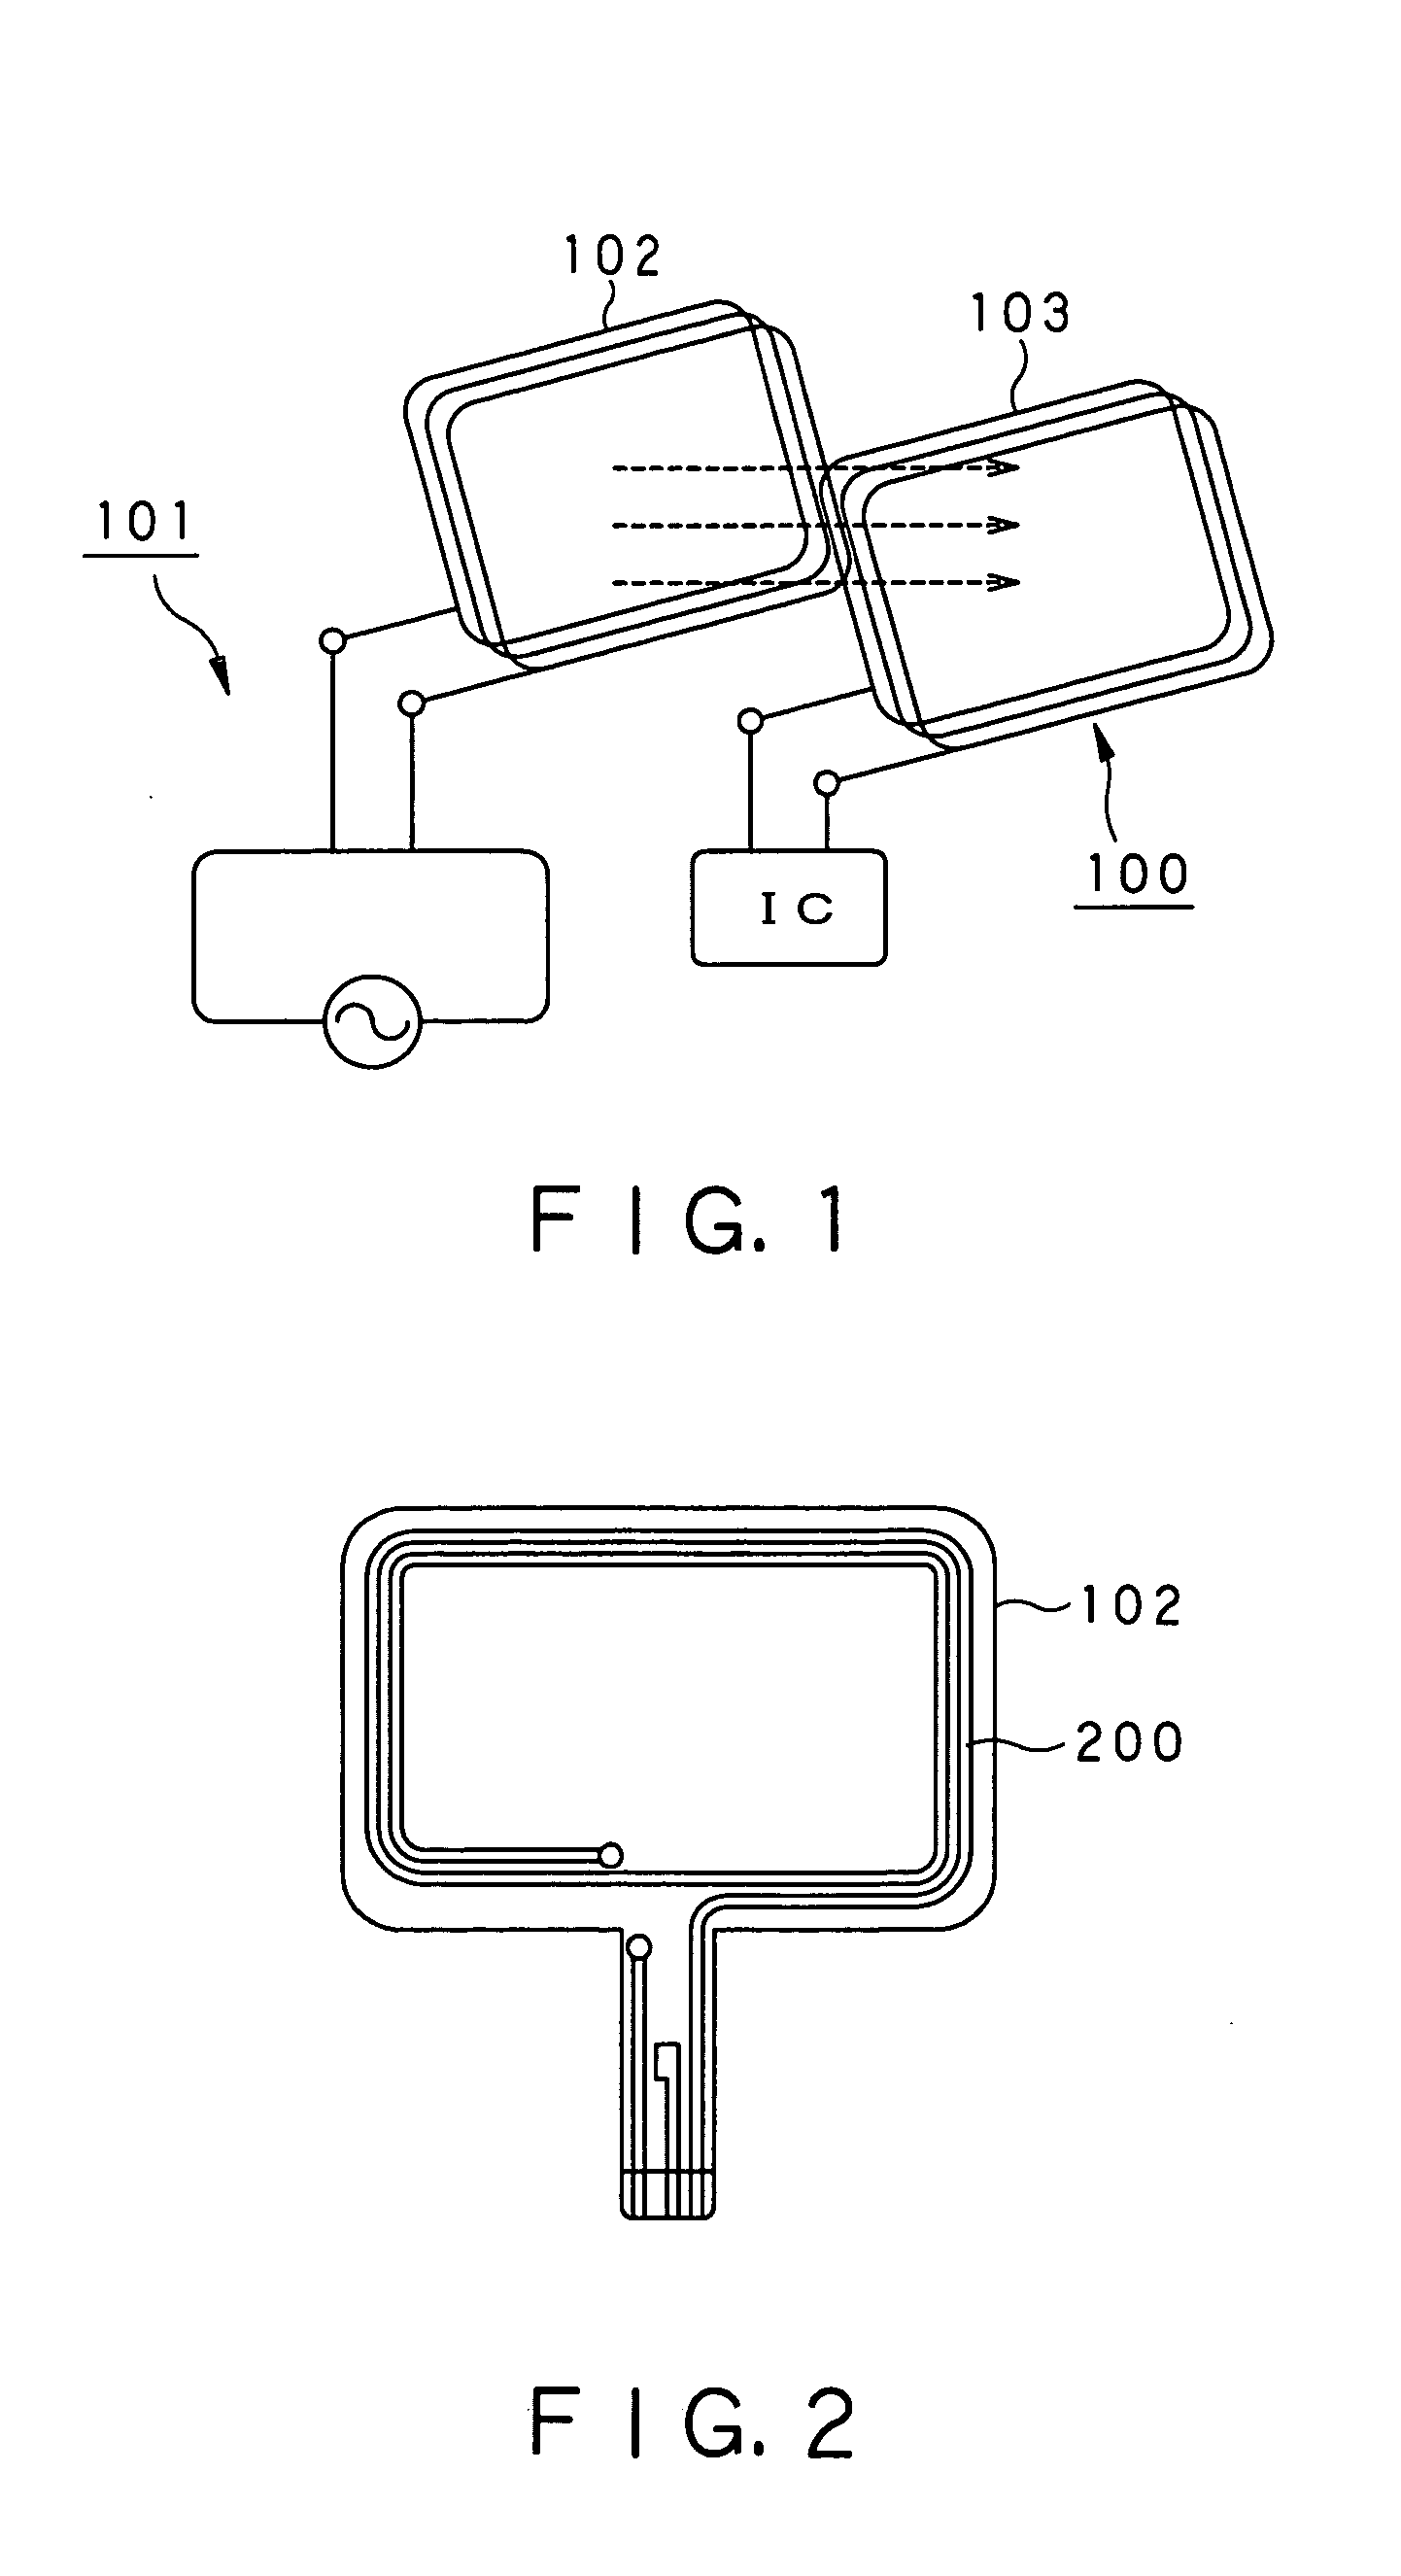 Electronic device with communication capability